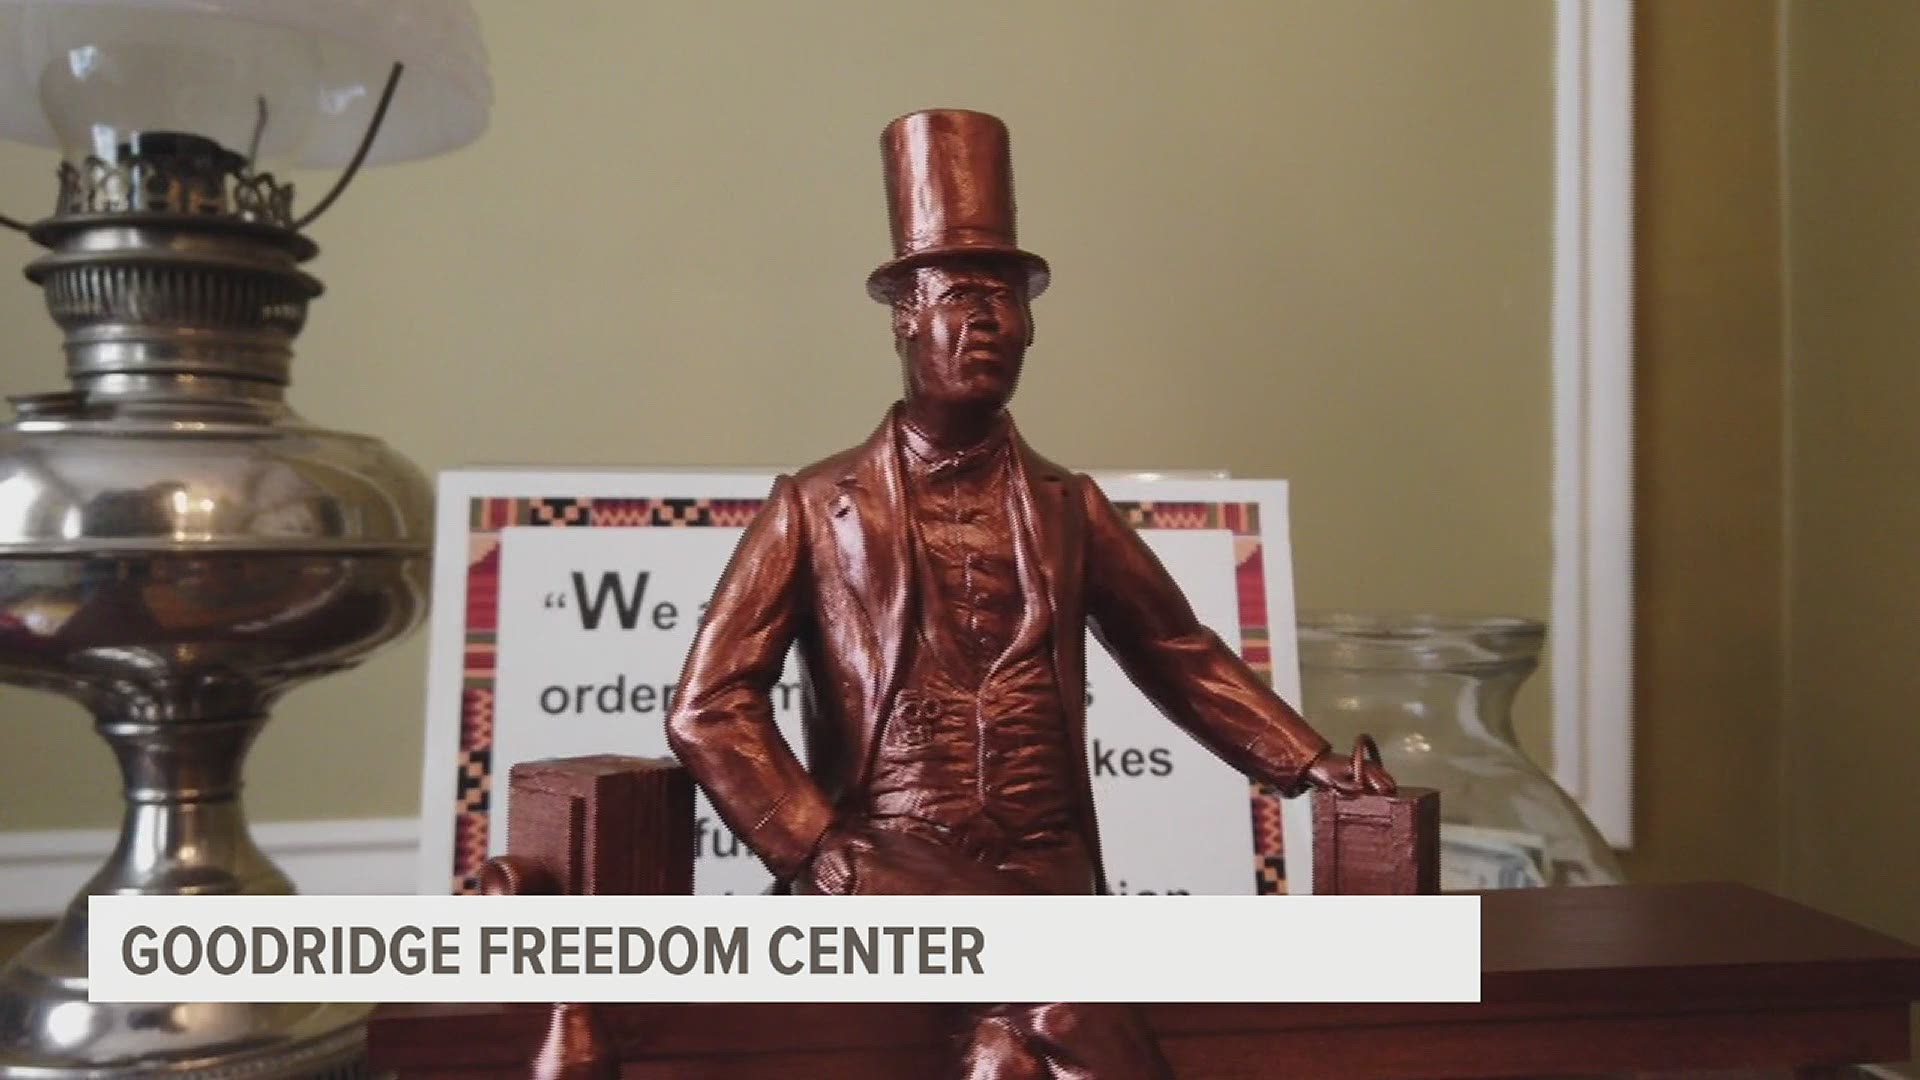 The Goodridge Freedom Center says the statue was made possible through donations from Give Local York.